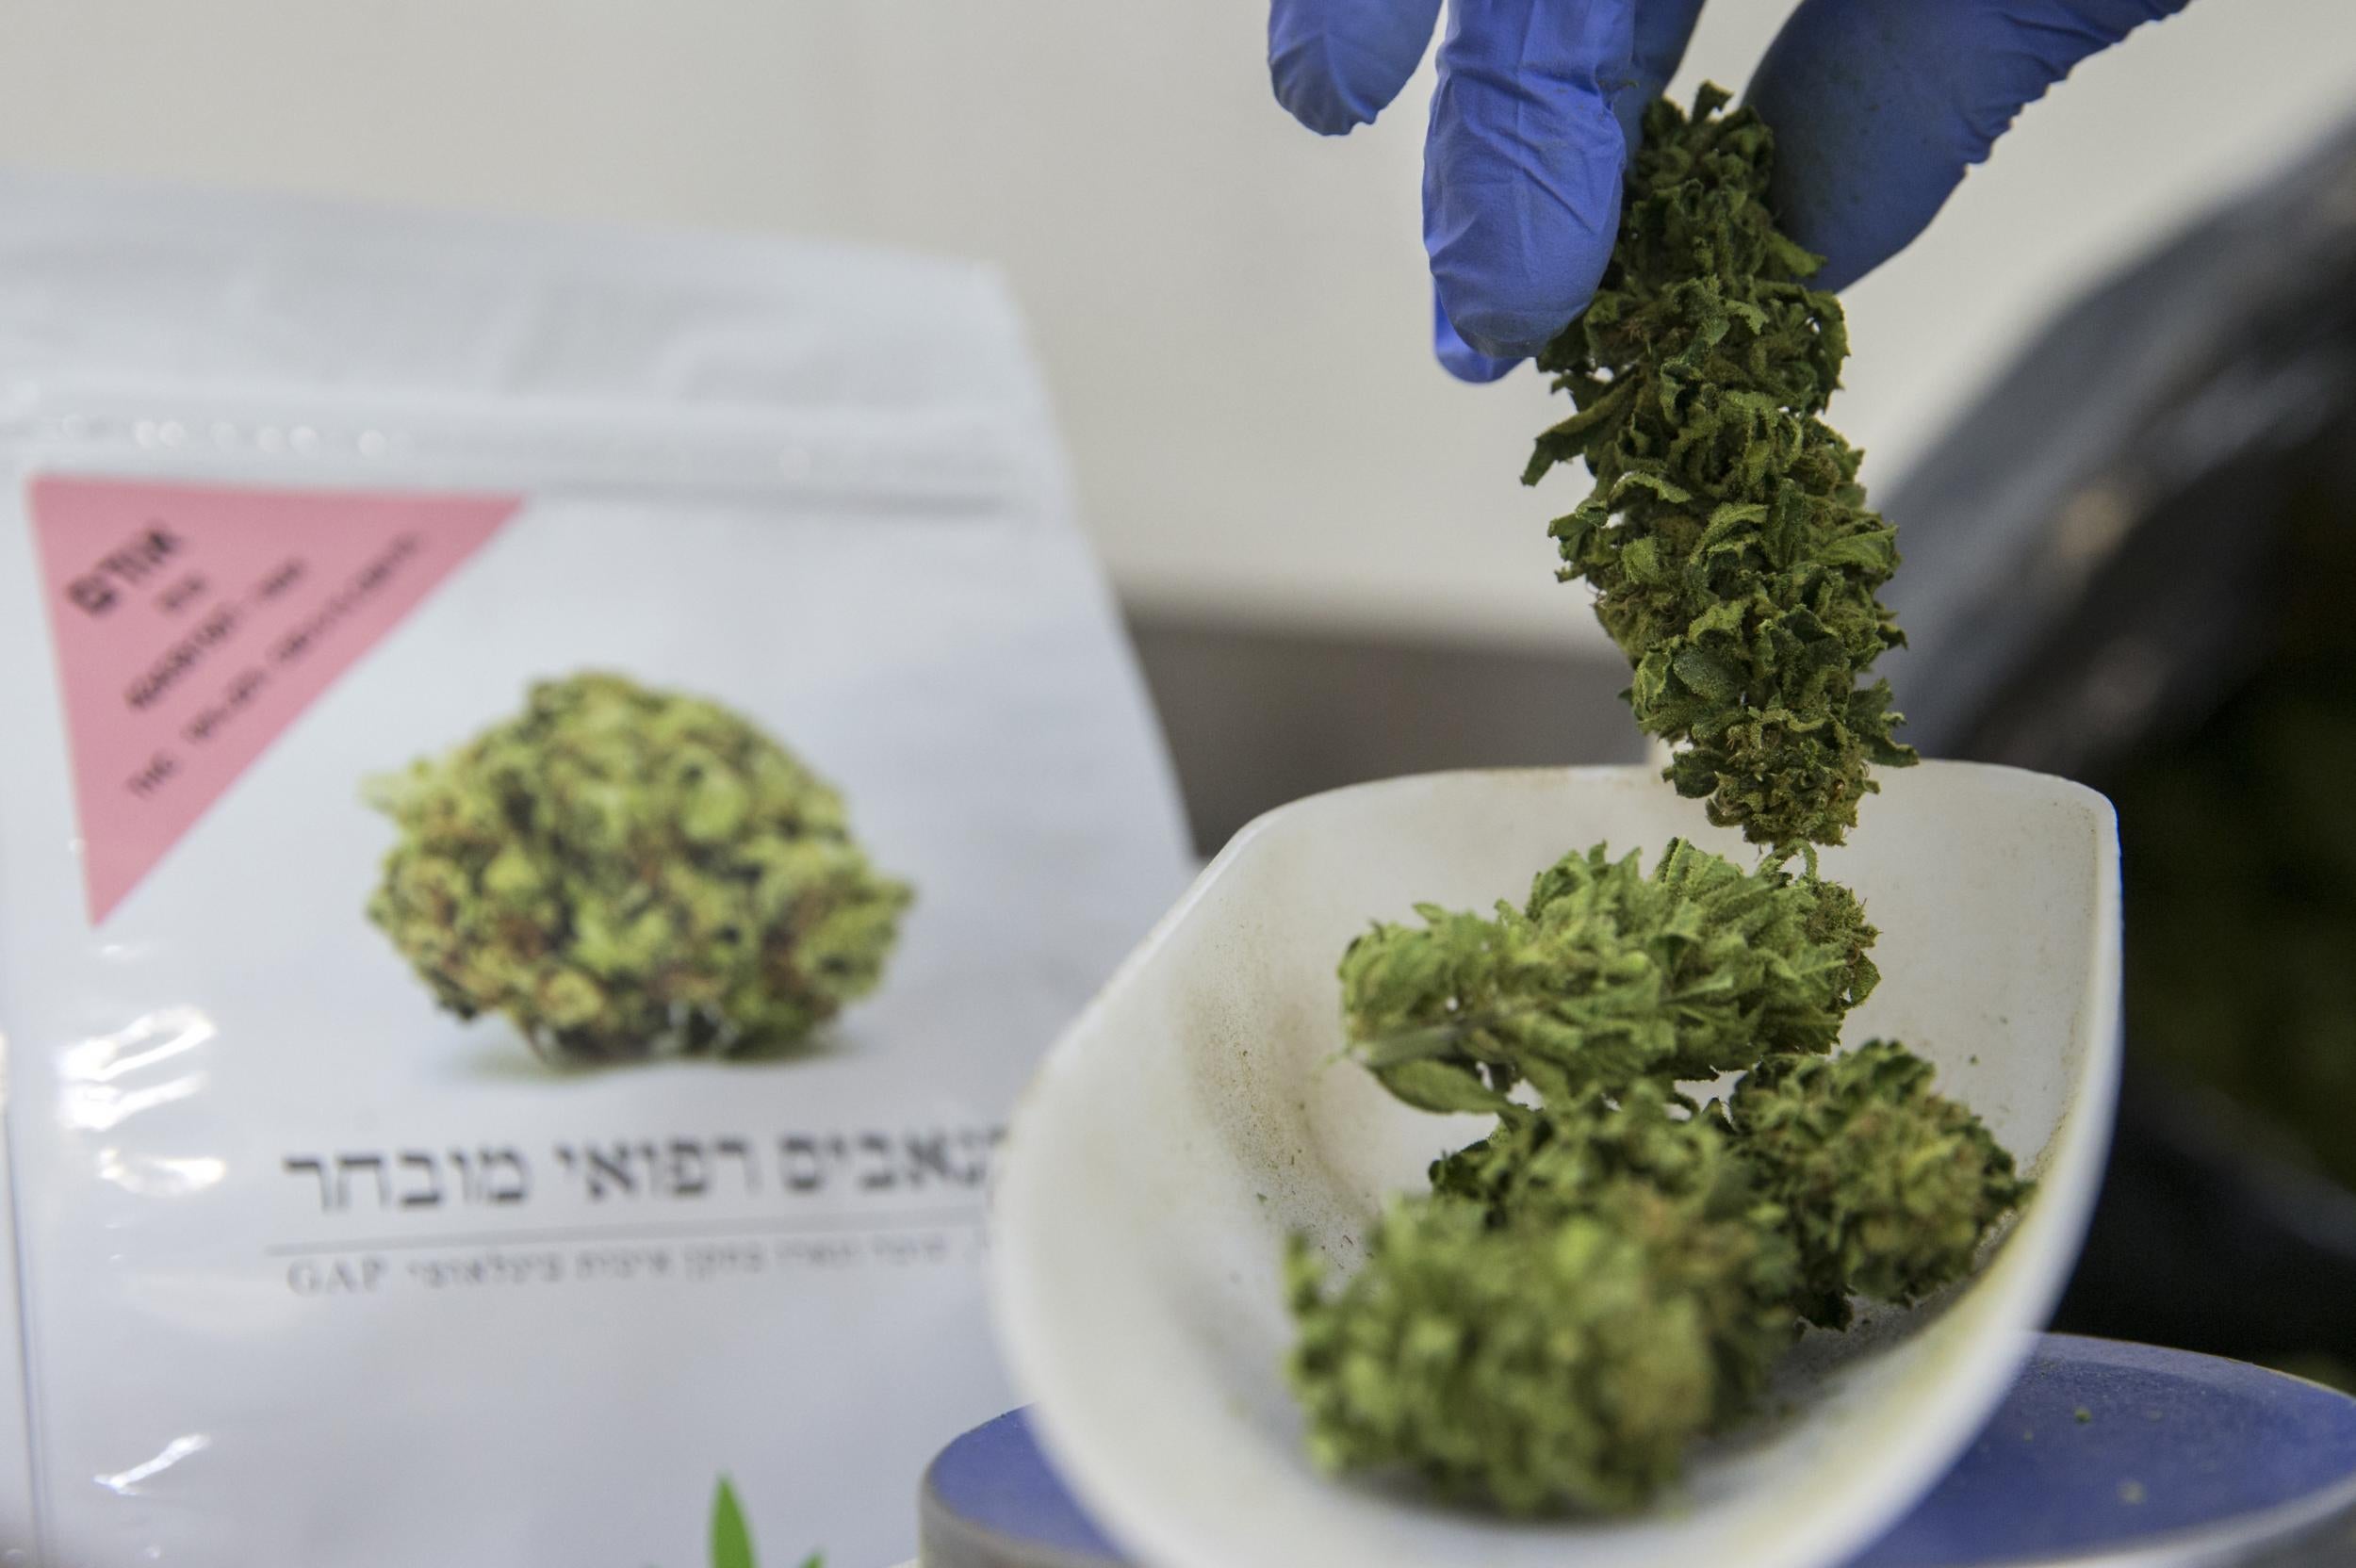 Almost 9 per cent of Israelis use cannabis